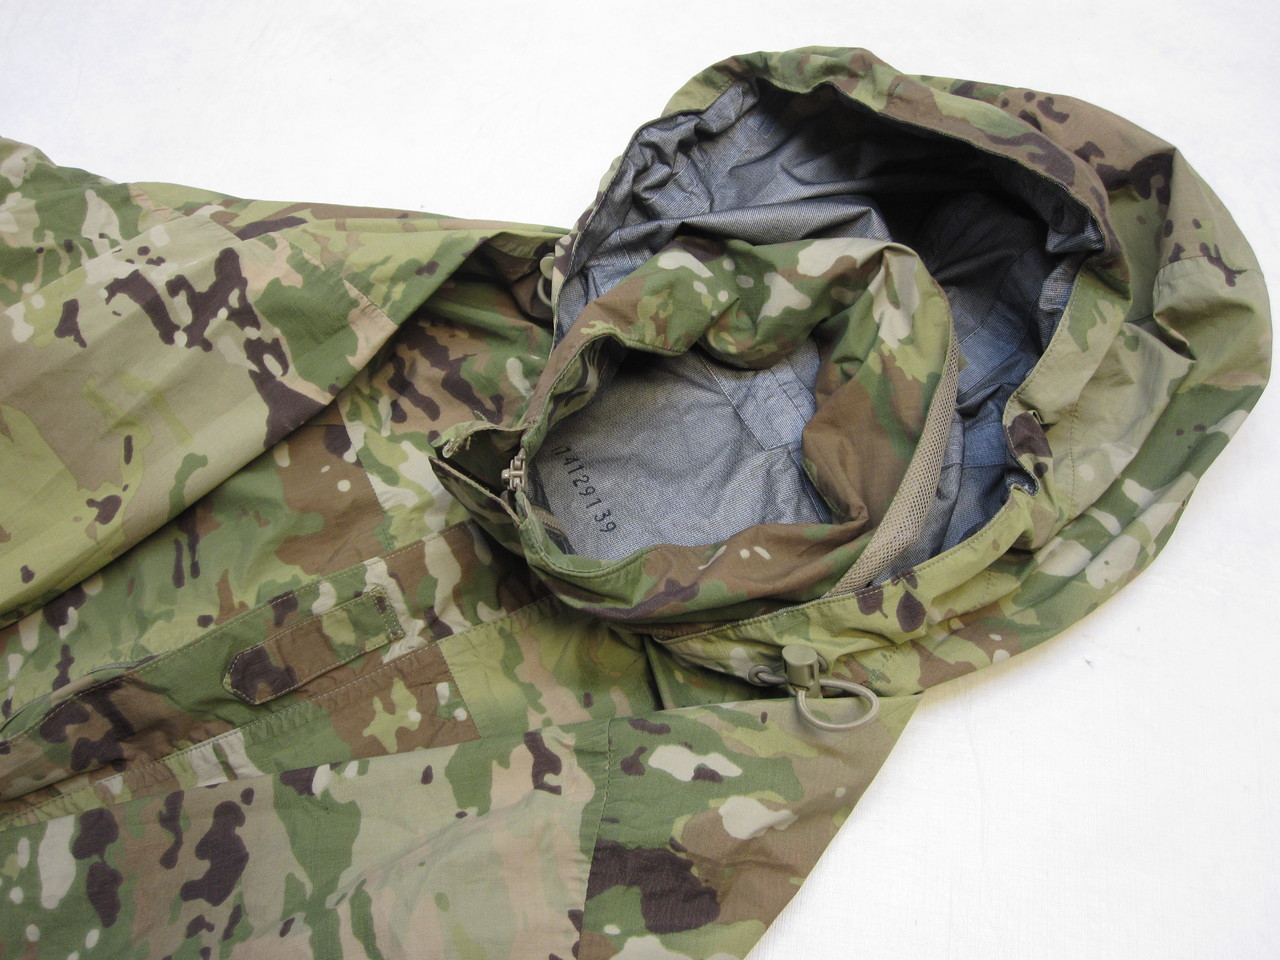 Army Wet Weather Gear - Army Military